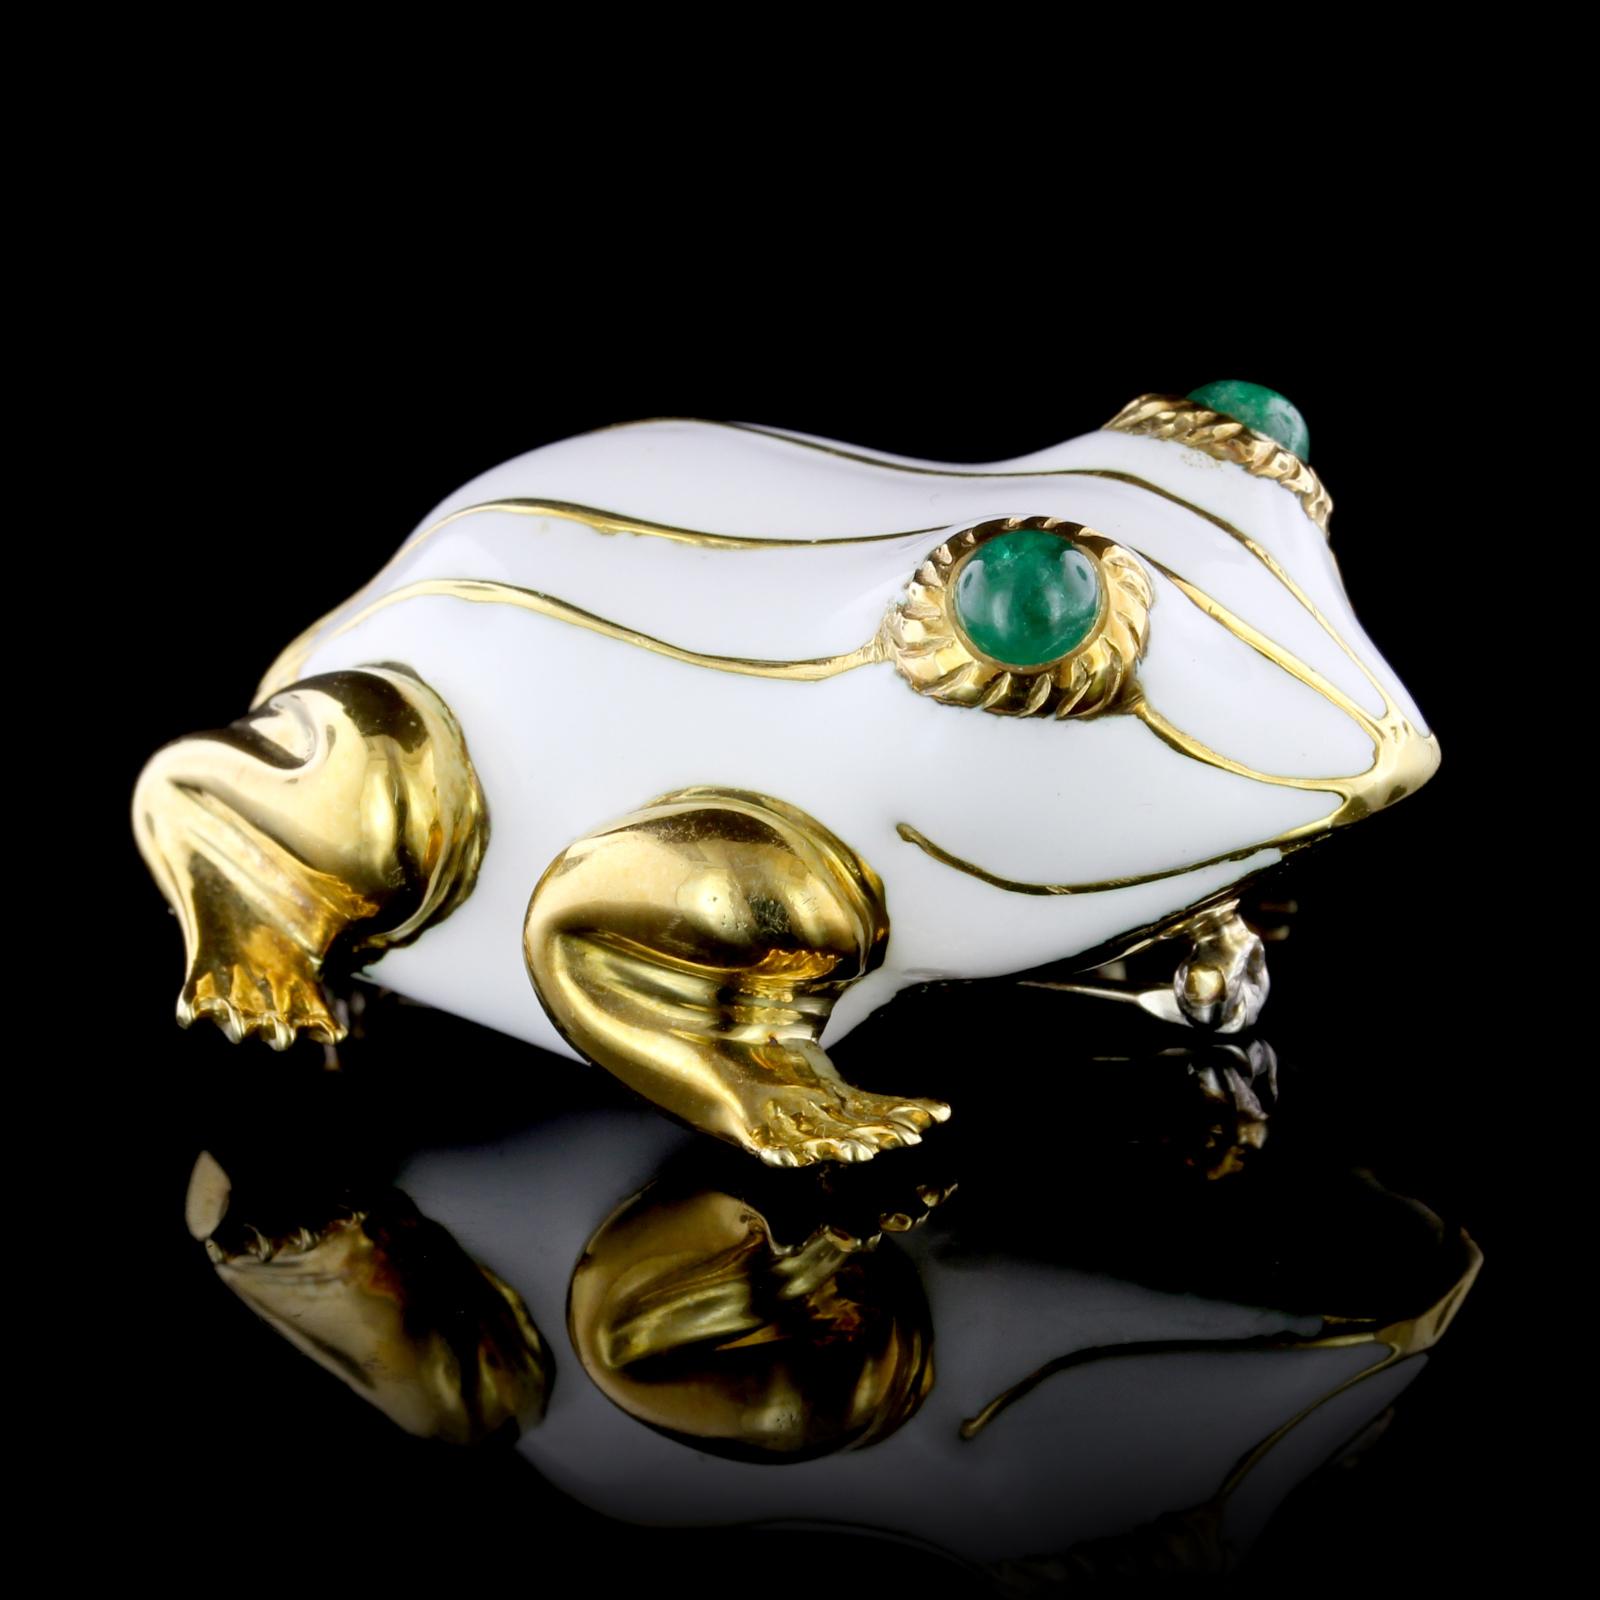 18 Karat Yellow Gold White Enamel and Emerald Frog Brooch In Good Condition For Sale In Nashua, NH